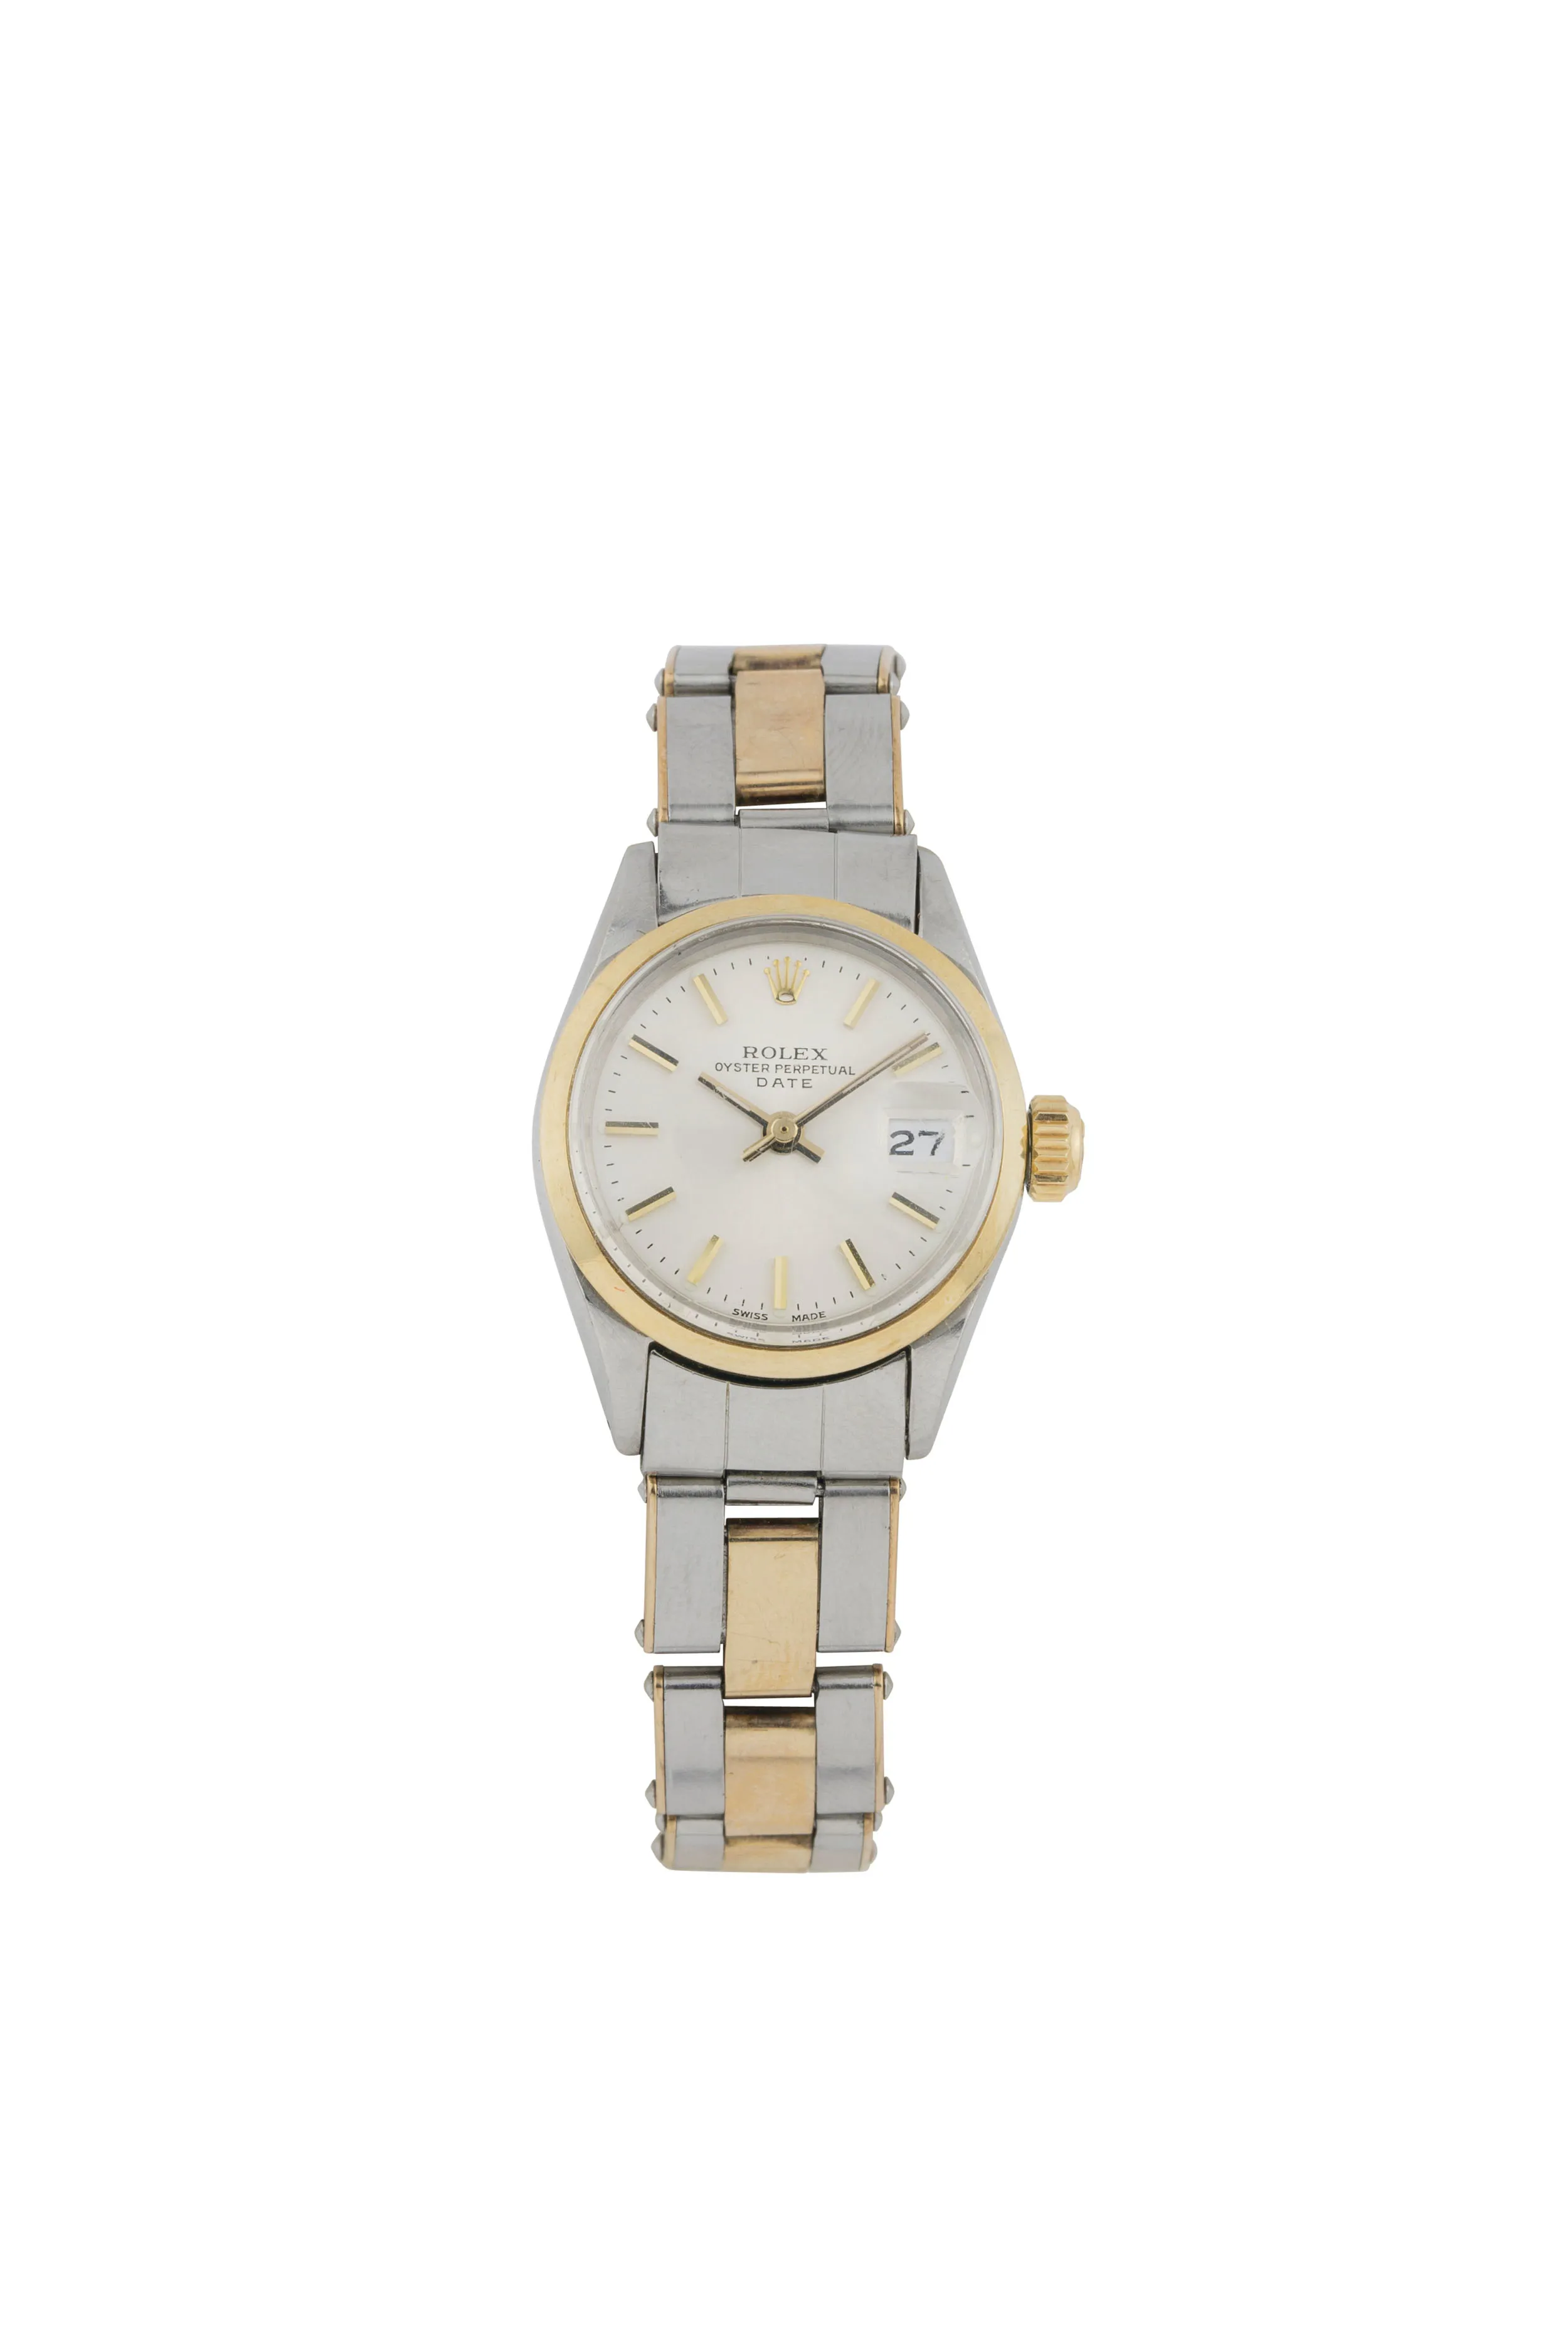 Rolex Oyster Perpetual Lady Date 6516 24mm Yellow gold and stainless steel Silver